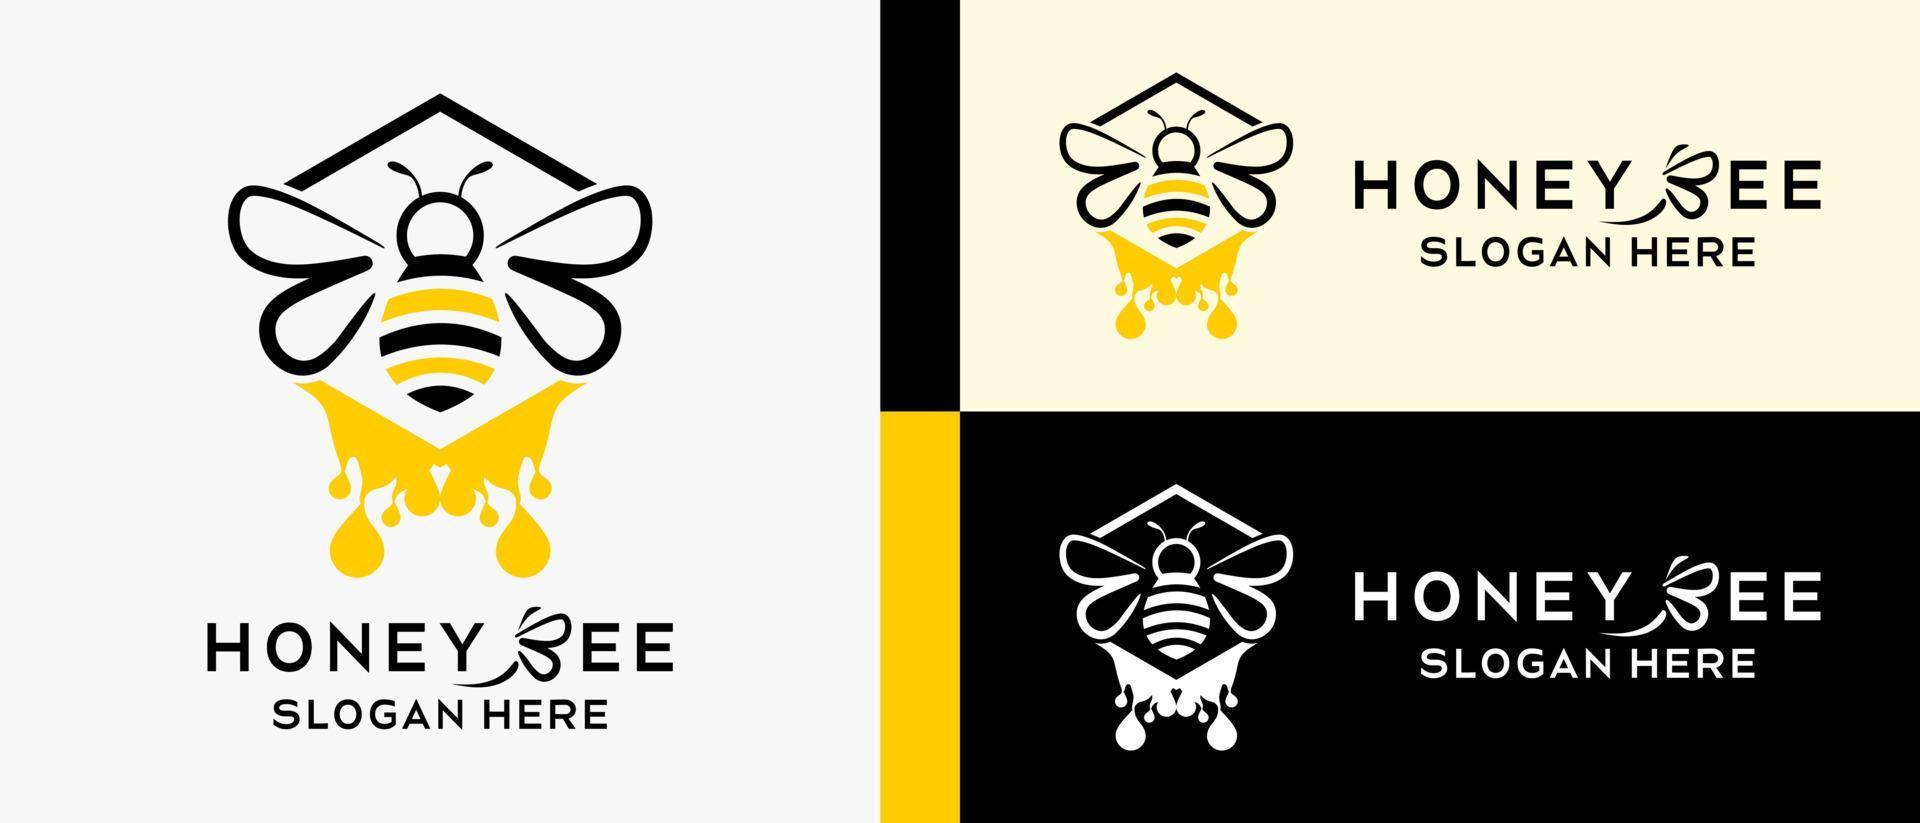 honey bee logo design template with creative concept of bee and honey drop elements. premium vector logo illustration